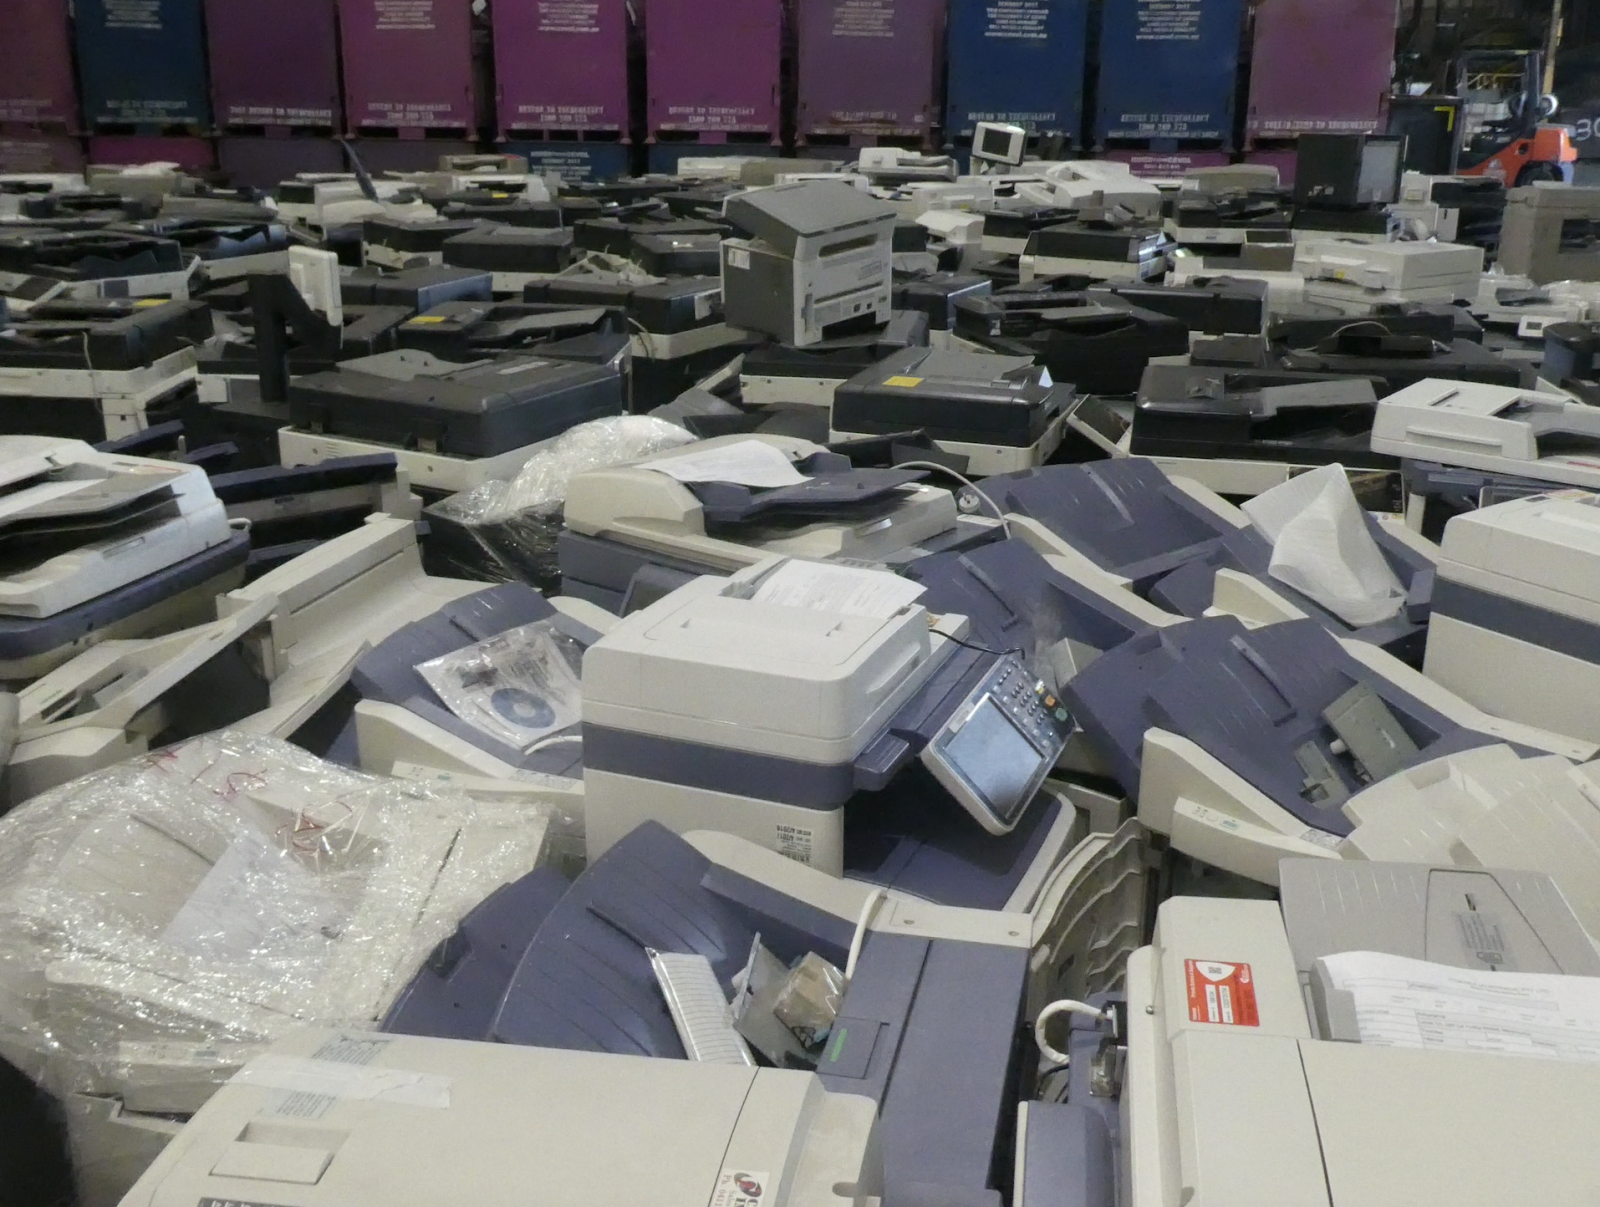 masses of old computers in a pile